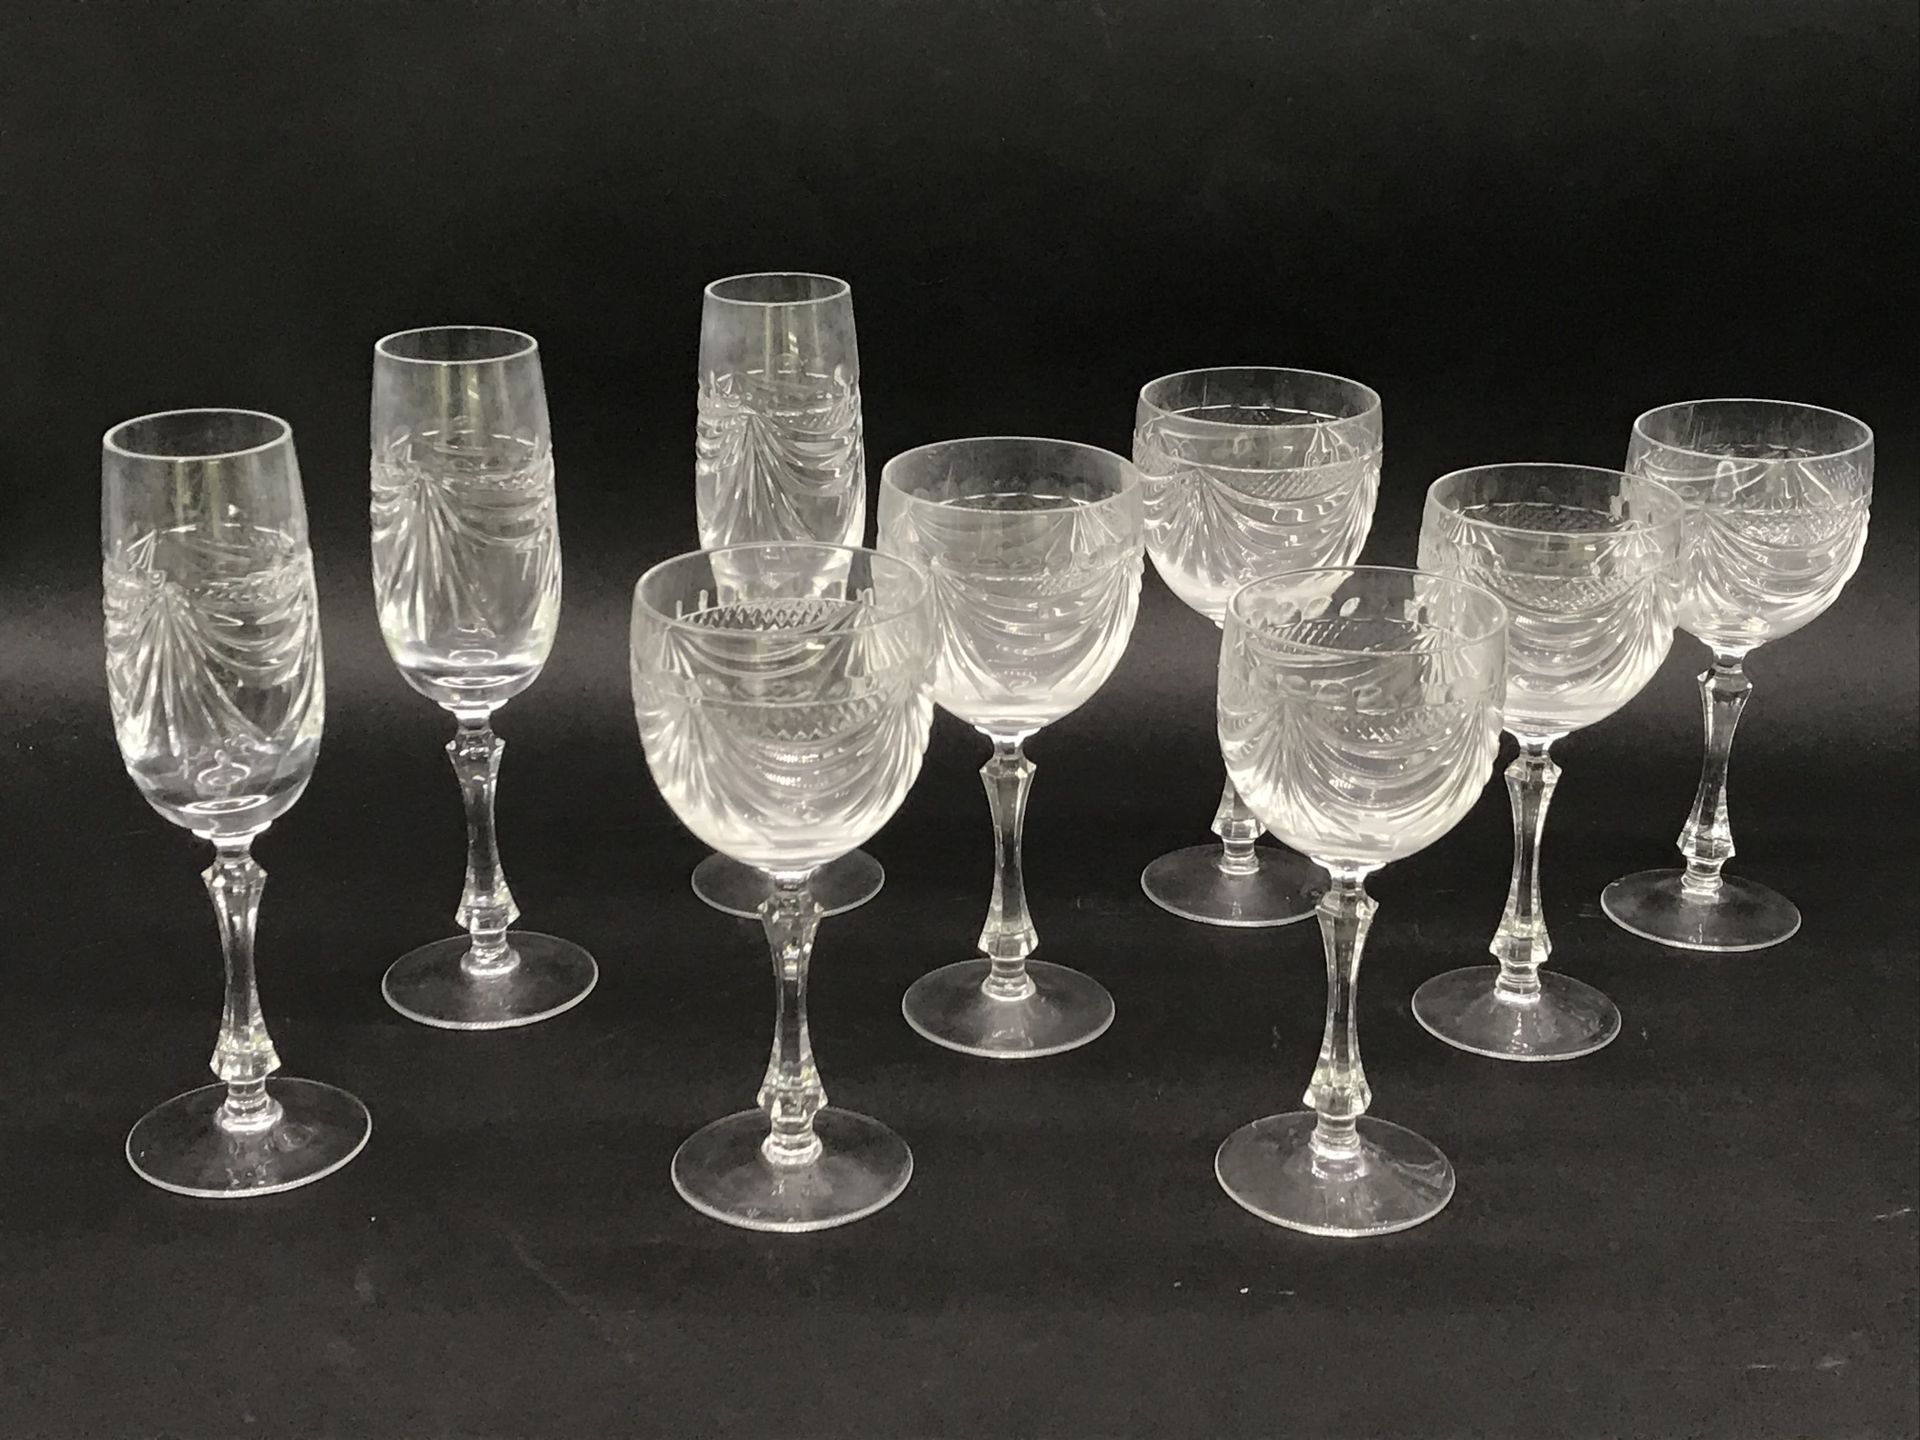 Null CRYSTAL GLASSWARE OF LORRAINE

Service of cut crystal glasses with draped d&hellip;